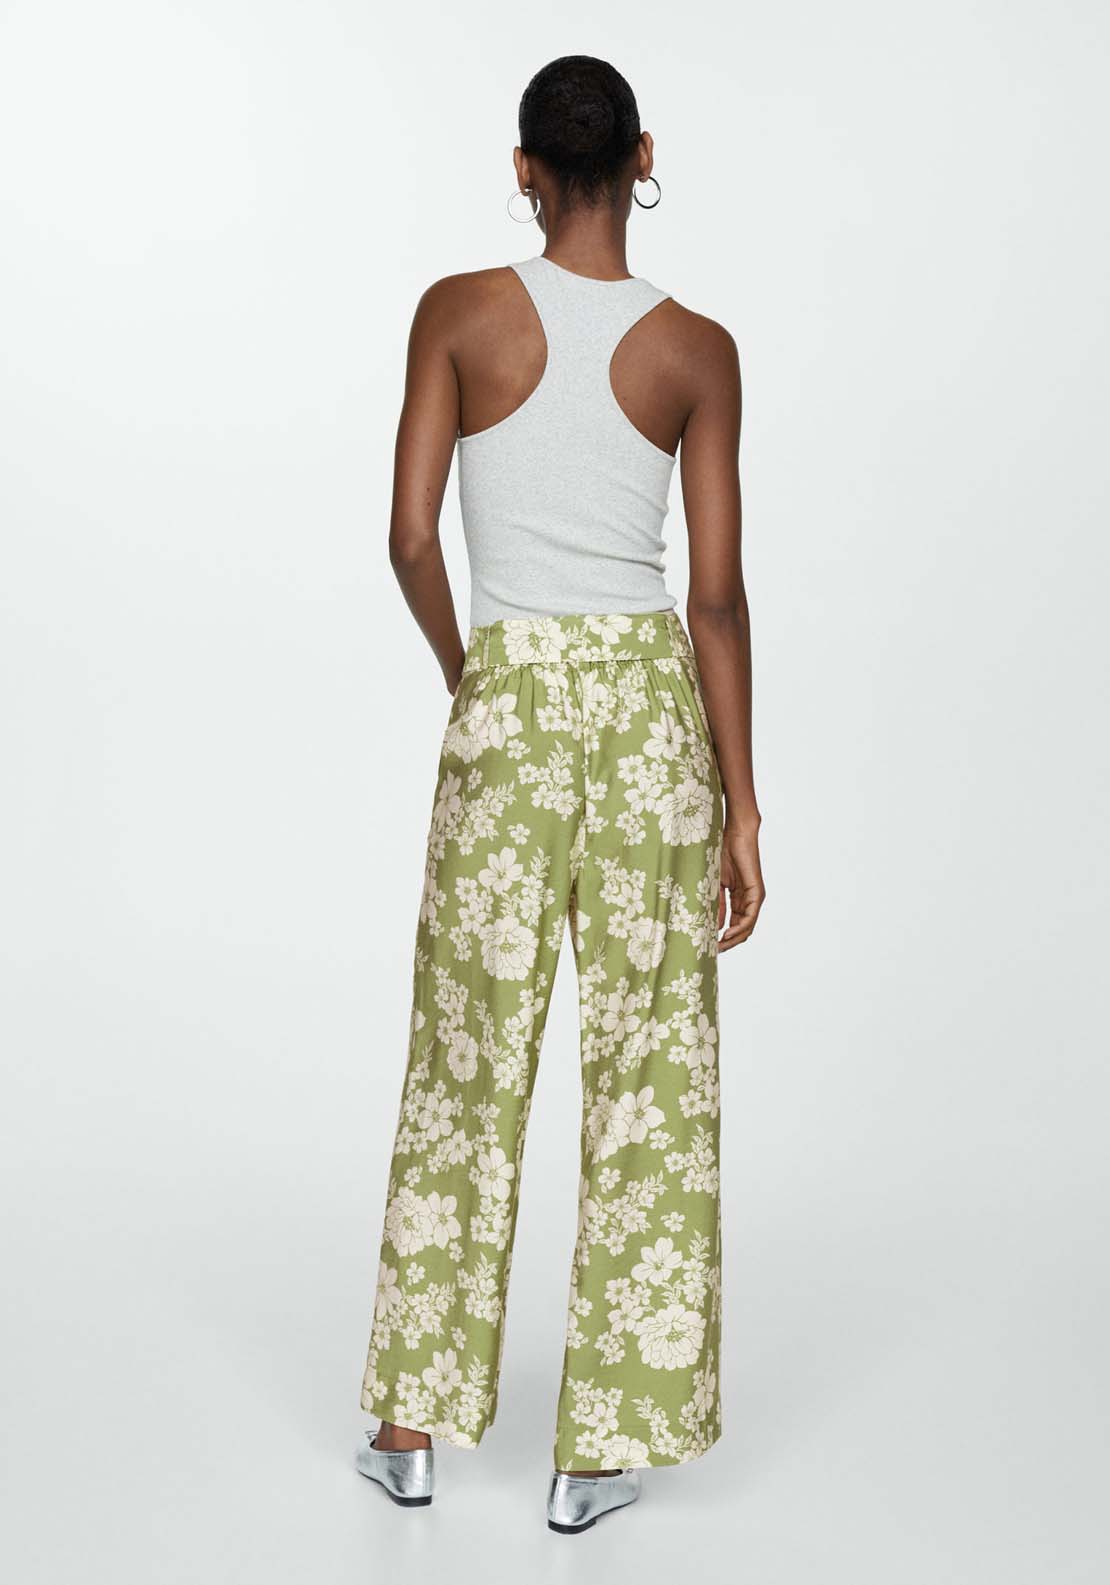 Mango Bow printed trouser 2 Shaws Department Stores